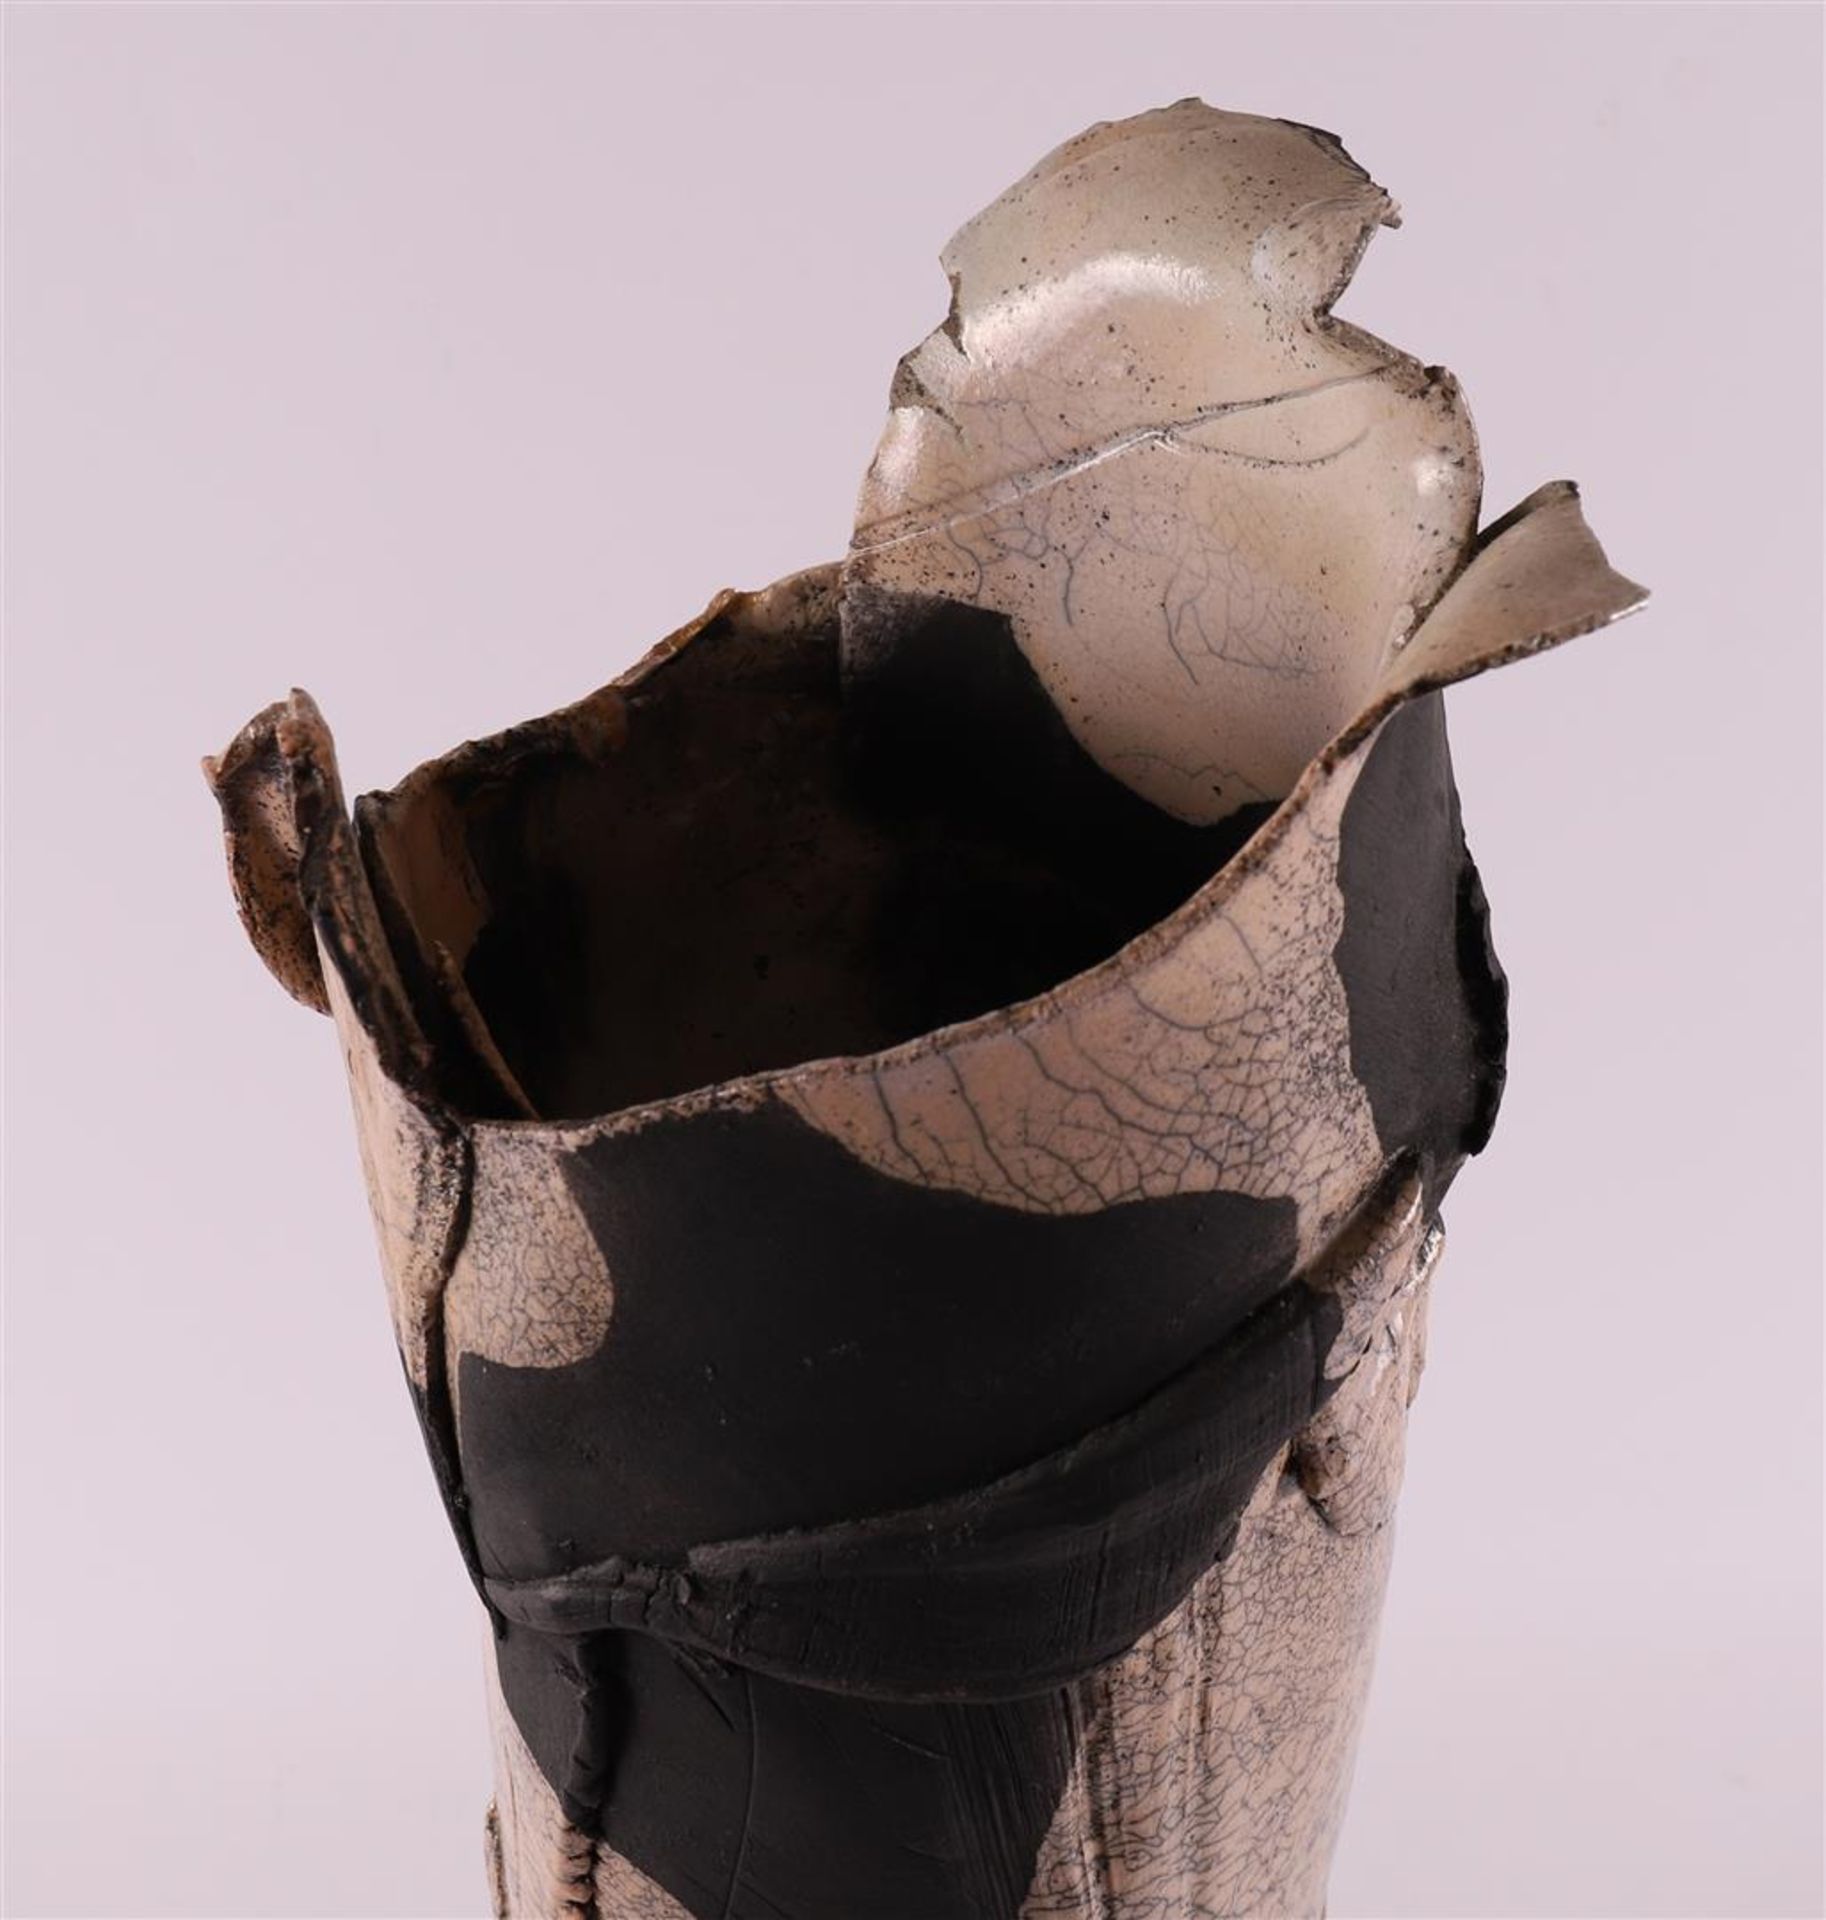 A polychrome ceramic vase, signed 'Loes 91' (= possibly Loes Koster). - Image 7 of 7